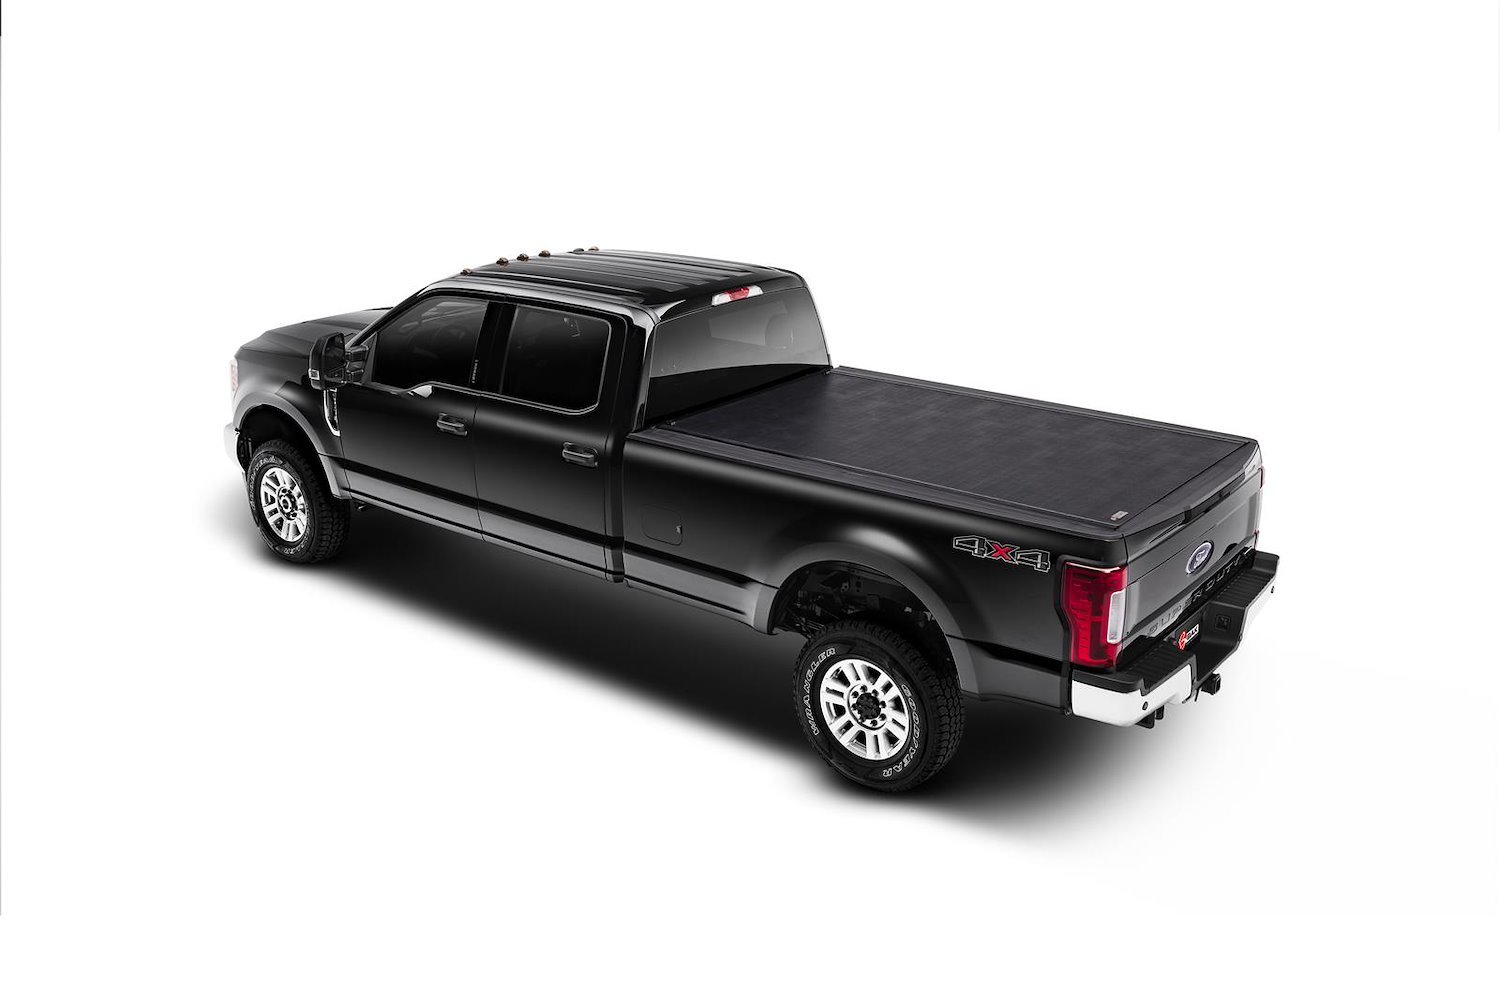 39331 Revolver X2 for Fits Select Ford Super-Duty 8.2 ft. Bed, Roll-Up Hard Cover Style [Black Finish]